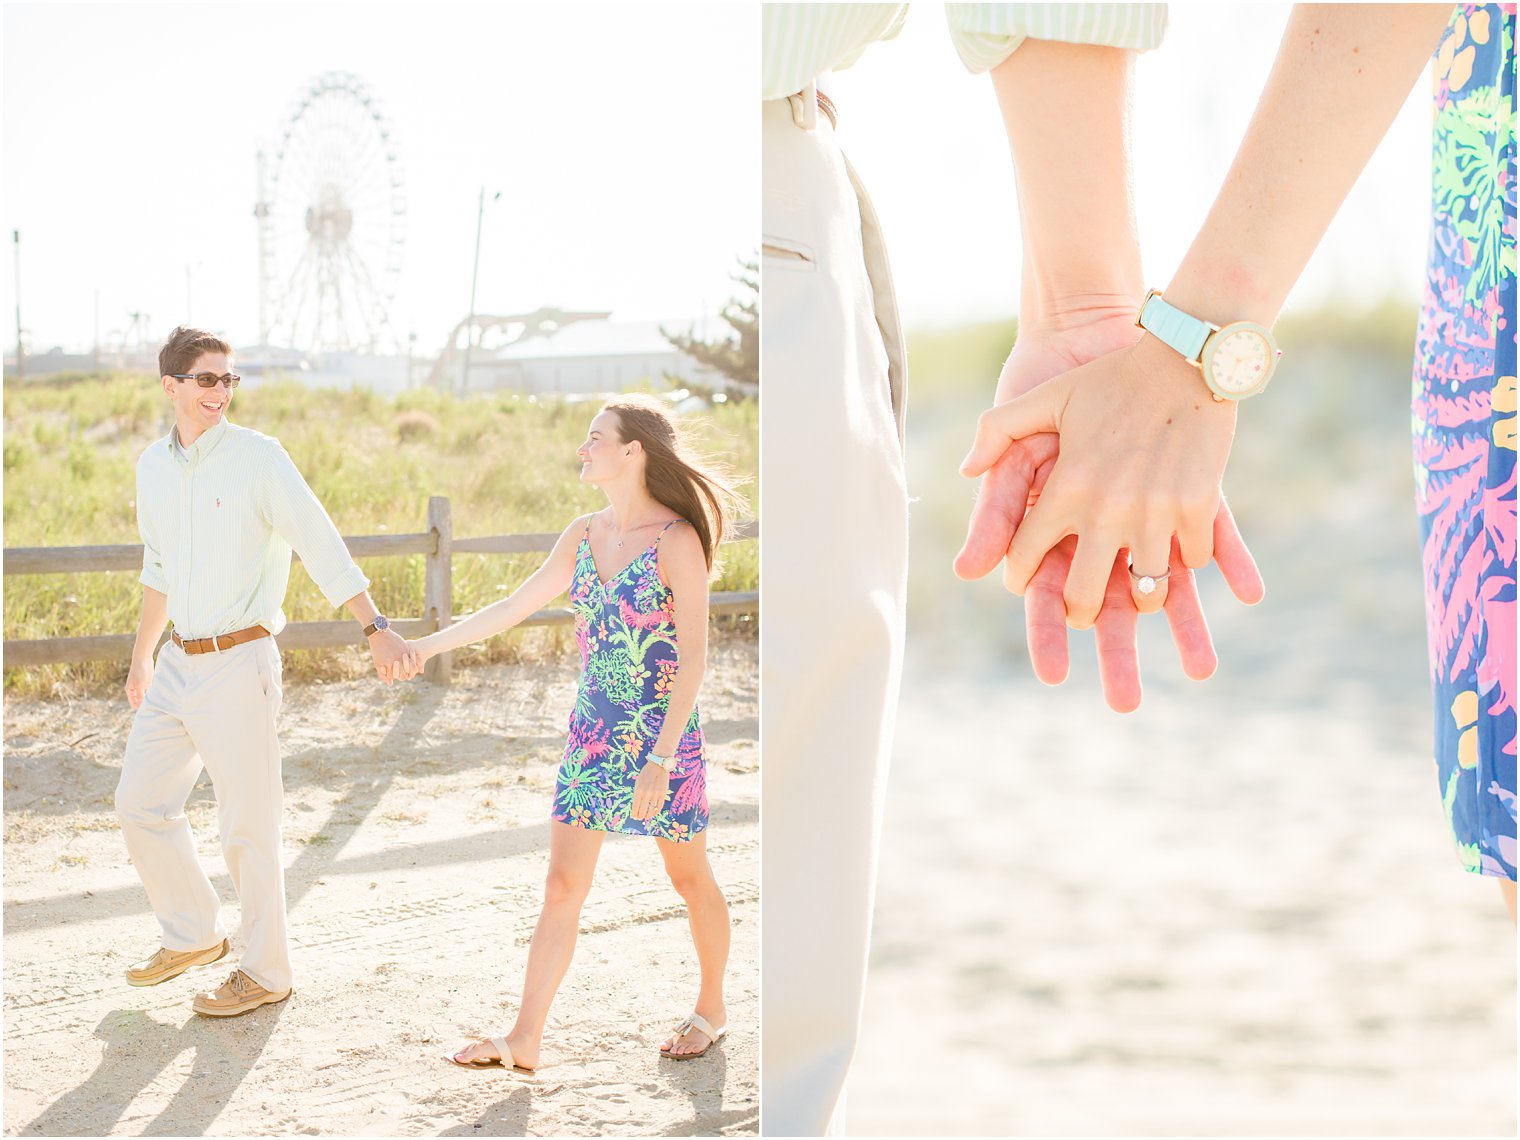 Engagement photos on a bright sunny day